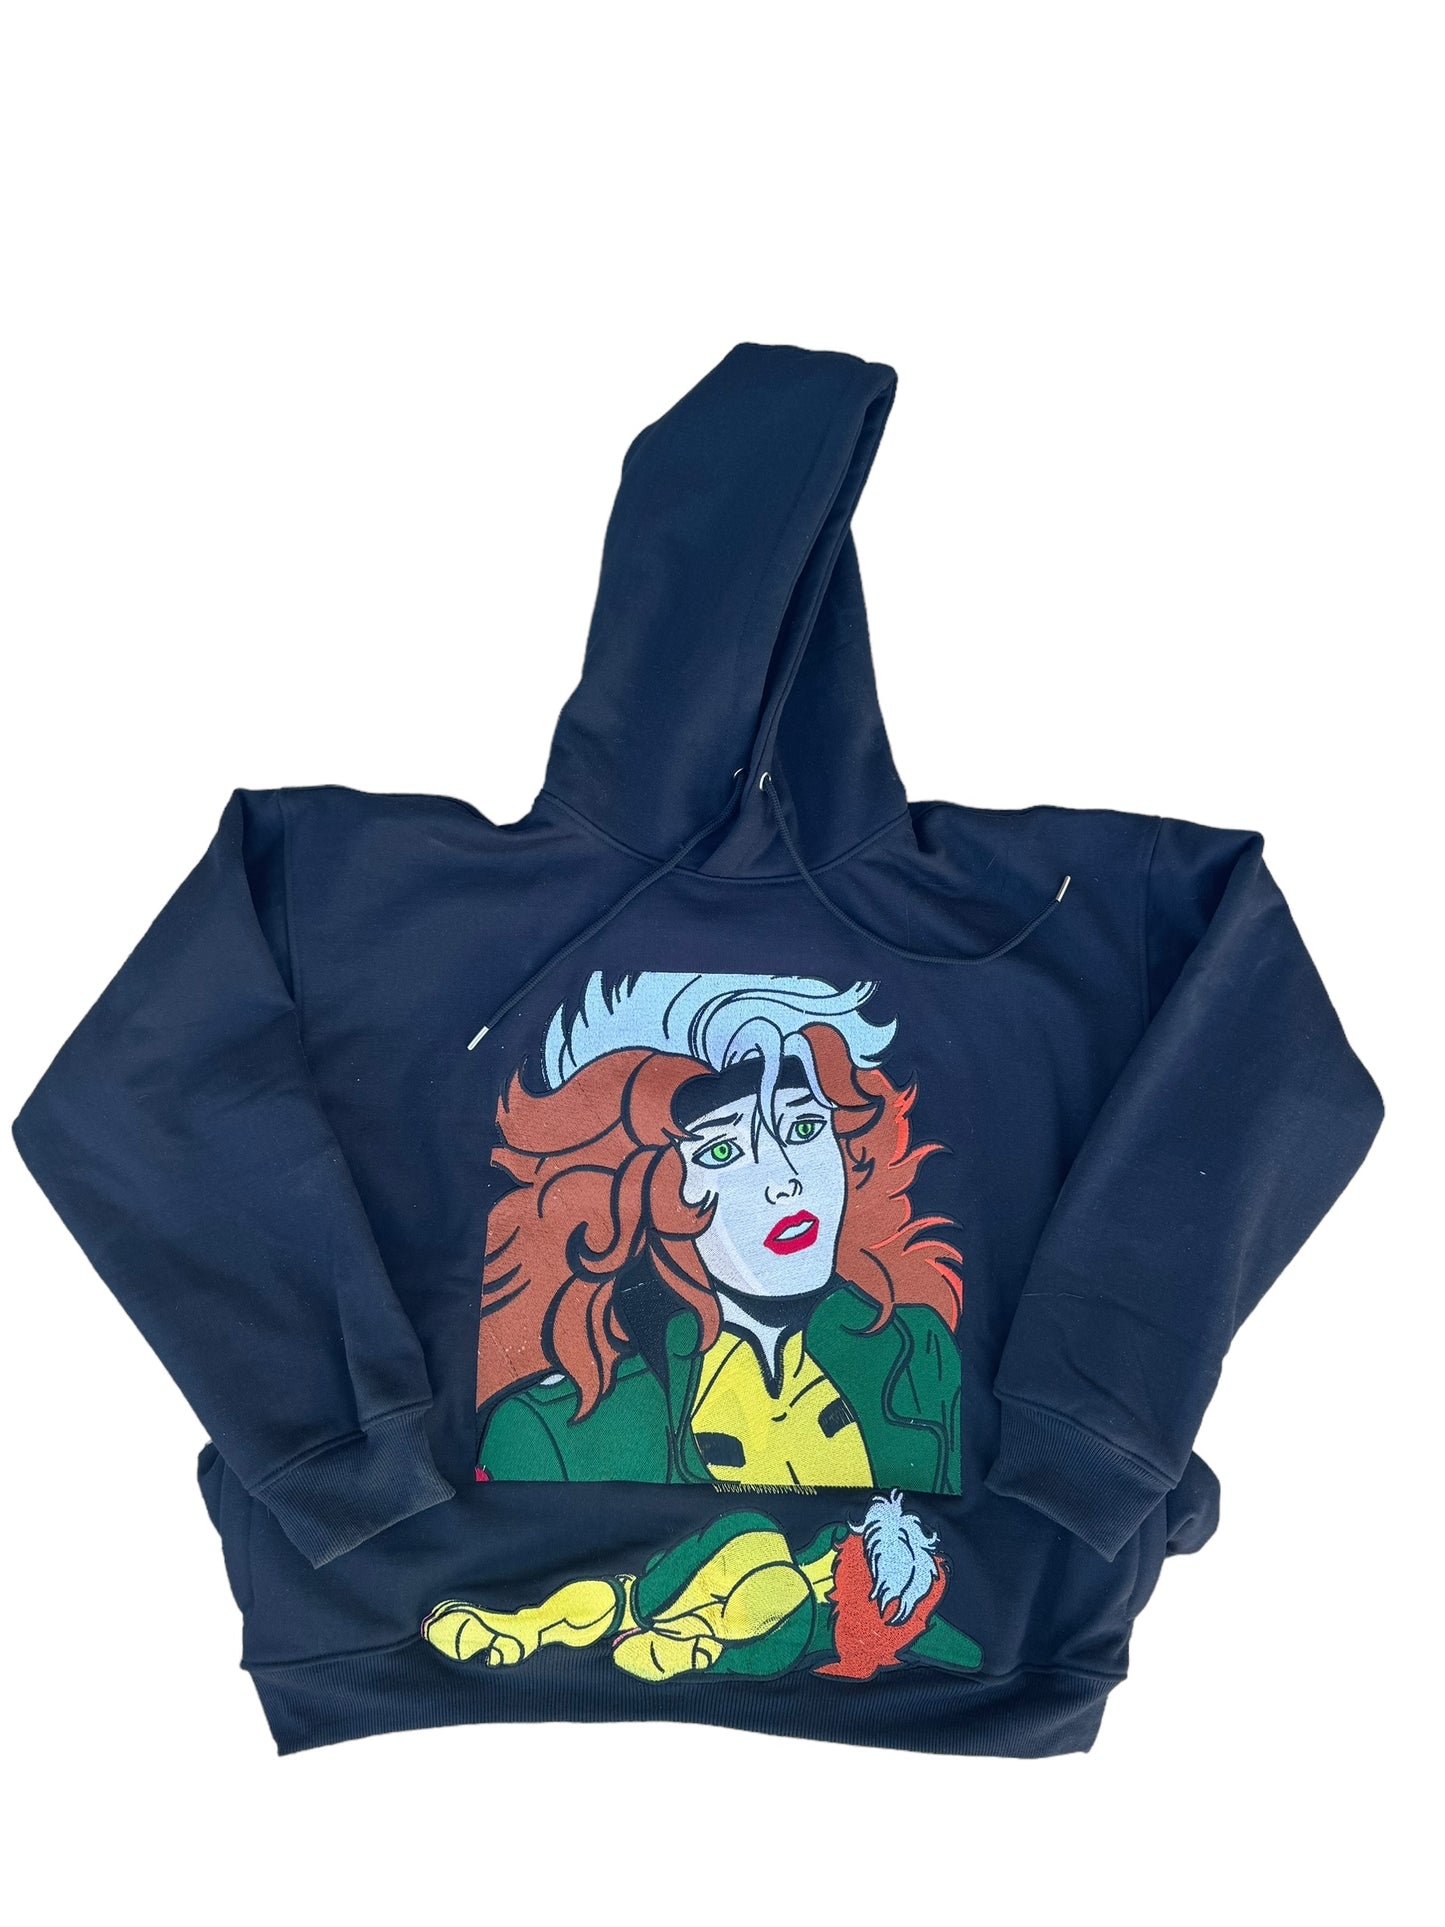 Rogue X-men the animated series big booty black hoodie avengers Wolverine rare